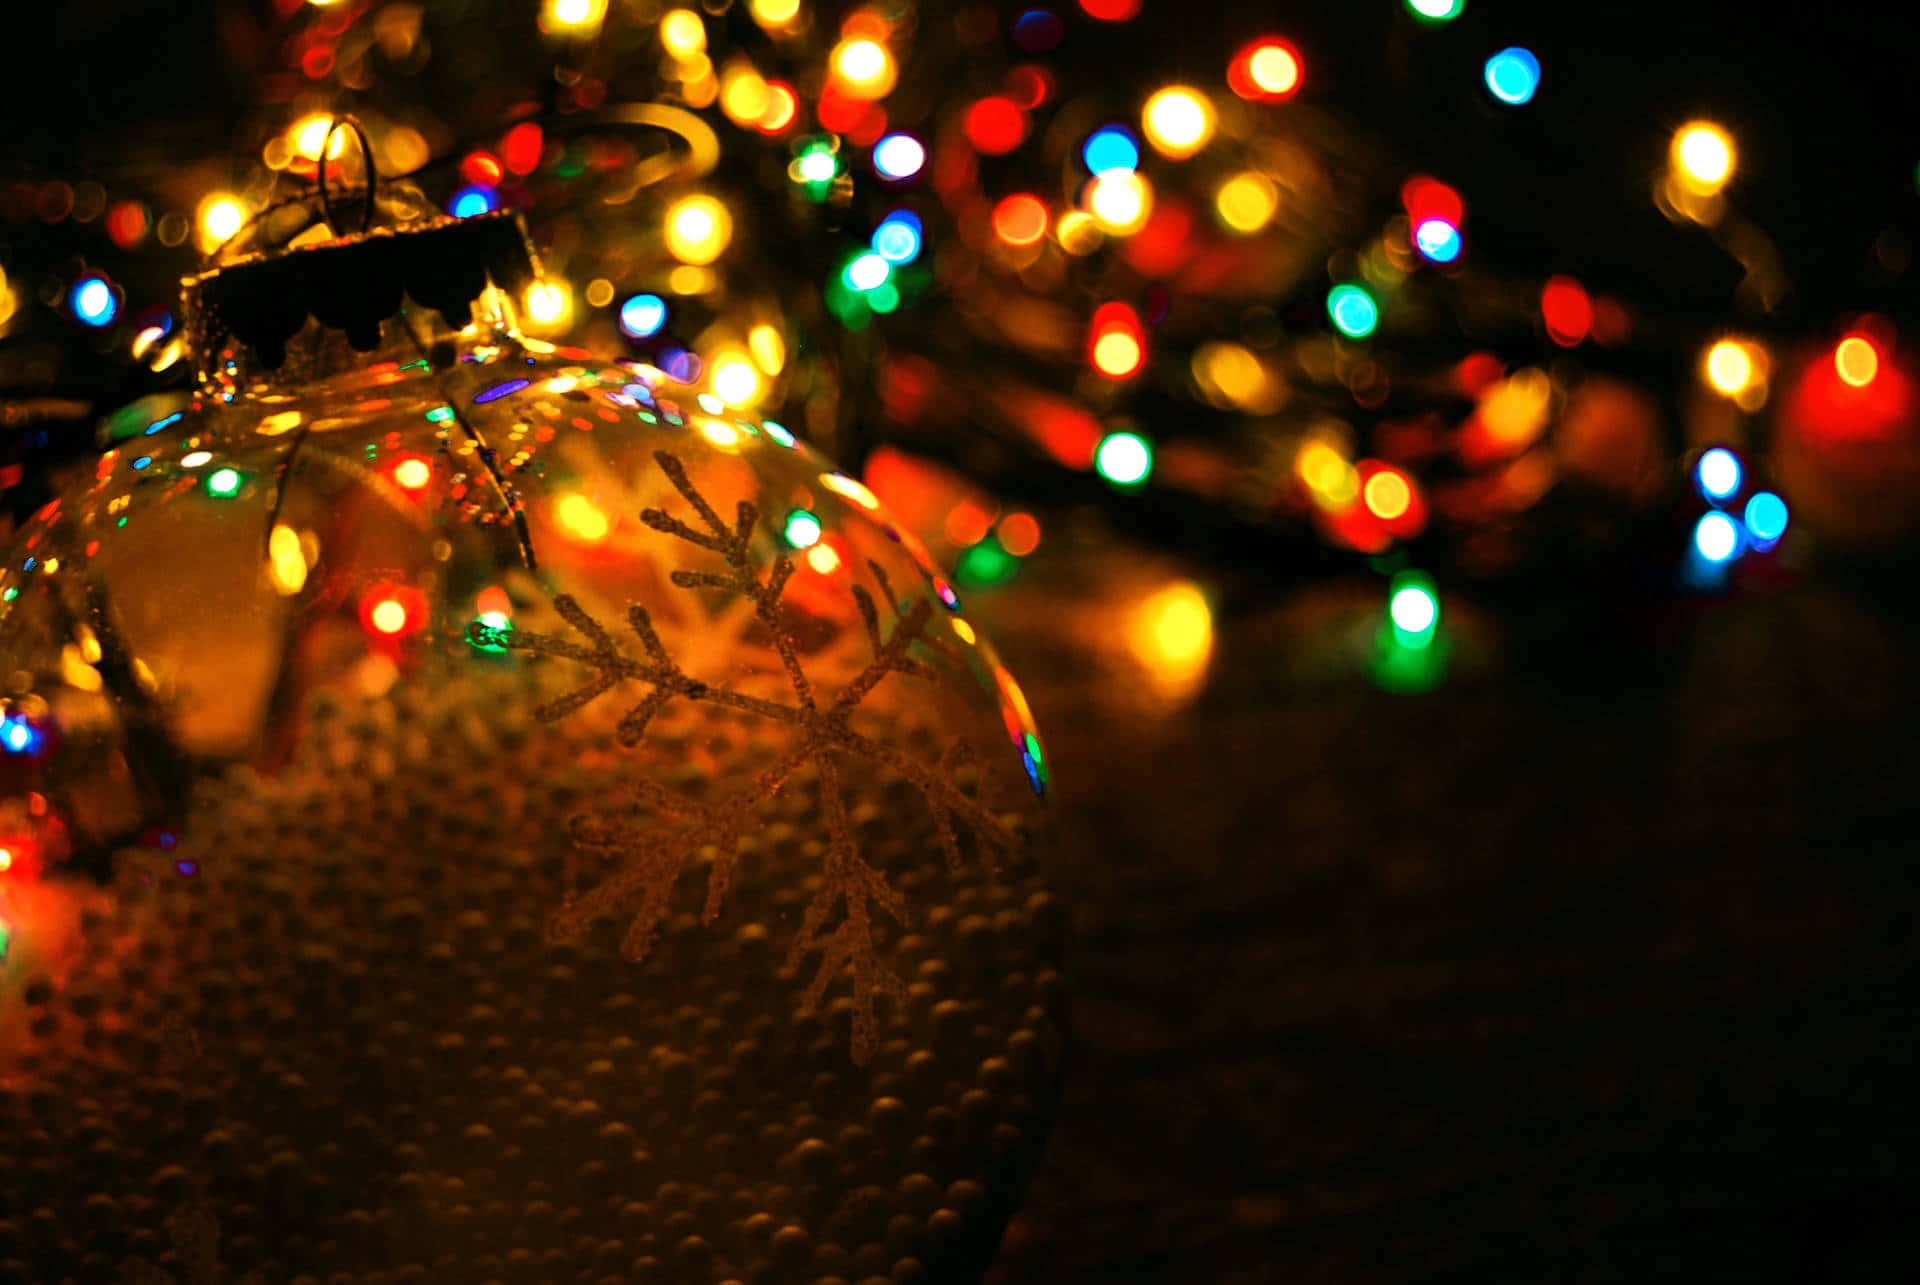 Spread Holiday Cheer With These Adorable Christmas Lights! Wallpaper